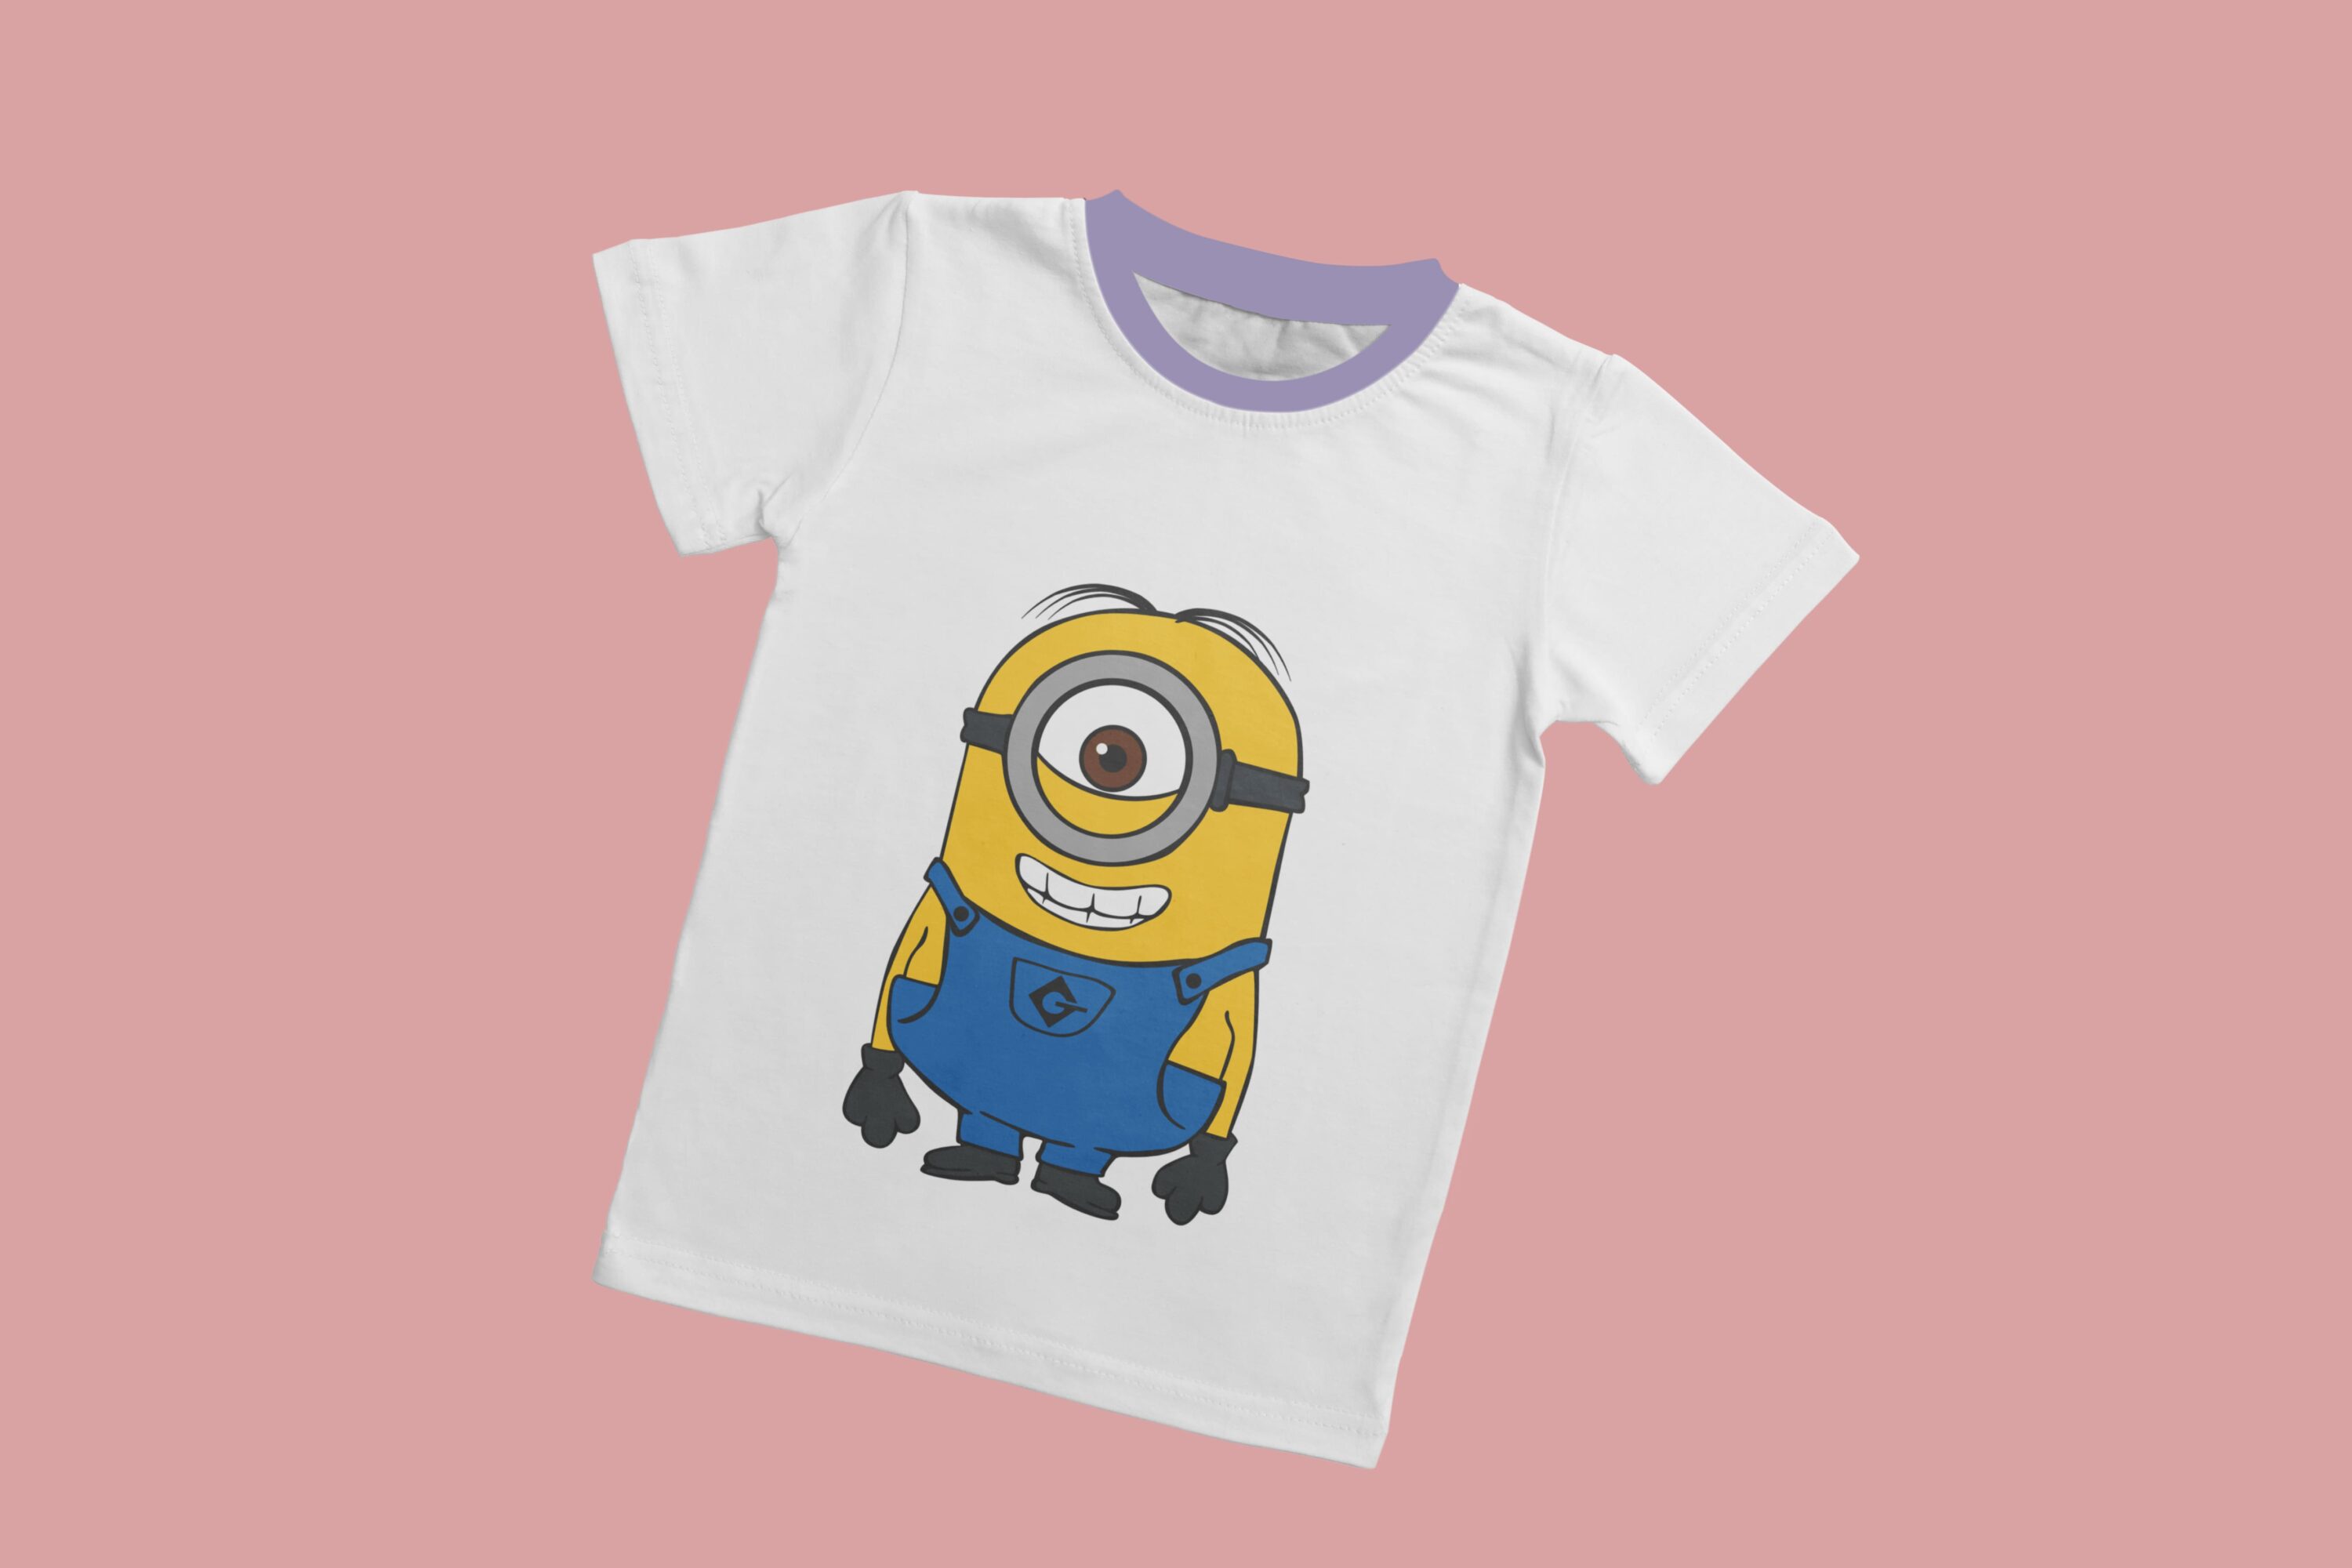 A white T-shirt with a lavender collar and a smiling minion with one eye.